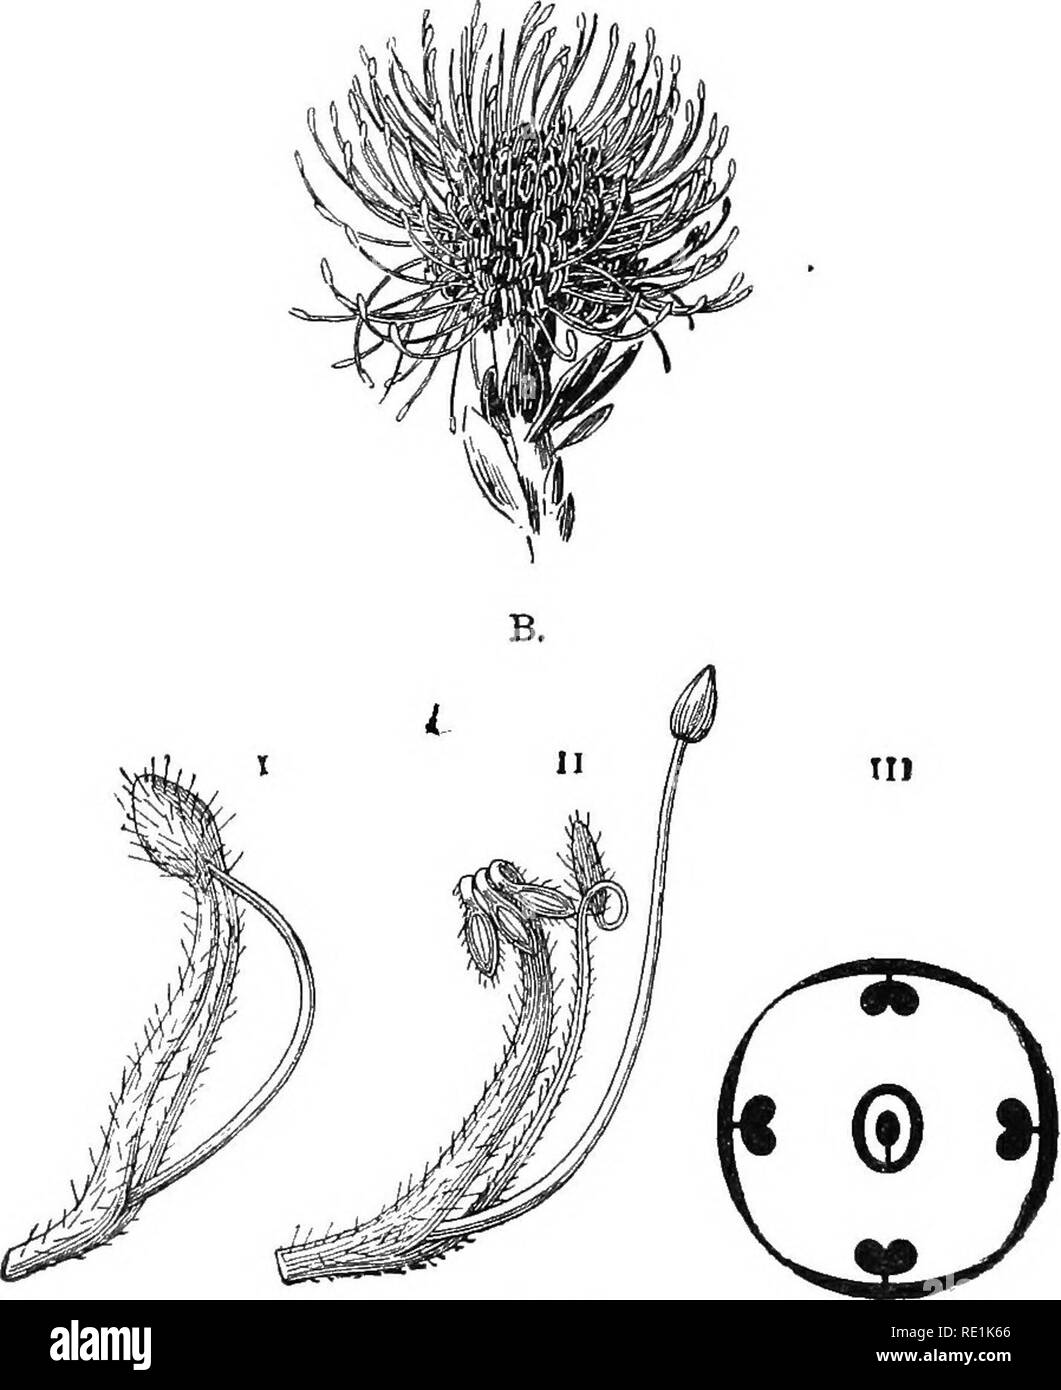 . South African botany. Botany. 166 SOUTH AFRICAN BOTANY 148. N. O. Cruciferae. General Characters.—Flowers, polypetalous hypogynous, parts in twos or fours; cruci- A.. Pig. 80. A. Flower head of Leucospermum elliptium. B. Leucospermuin conocarpum. I. Flower-bud. II. Flower opened. III. Floral diagram. form corolla, tetradynamous stamens; gynoecium syncarpons, 2 carpels; ovary 2 celled, placentation parietal; fruit a siliqua or silicula.. Please note that these images are extracted from scanned page images that may have been digitally enhanced for readability - coloration and appearance of the Stock Photo